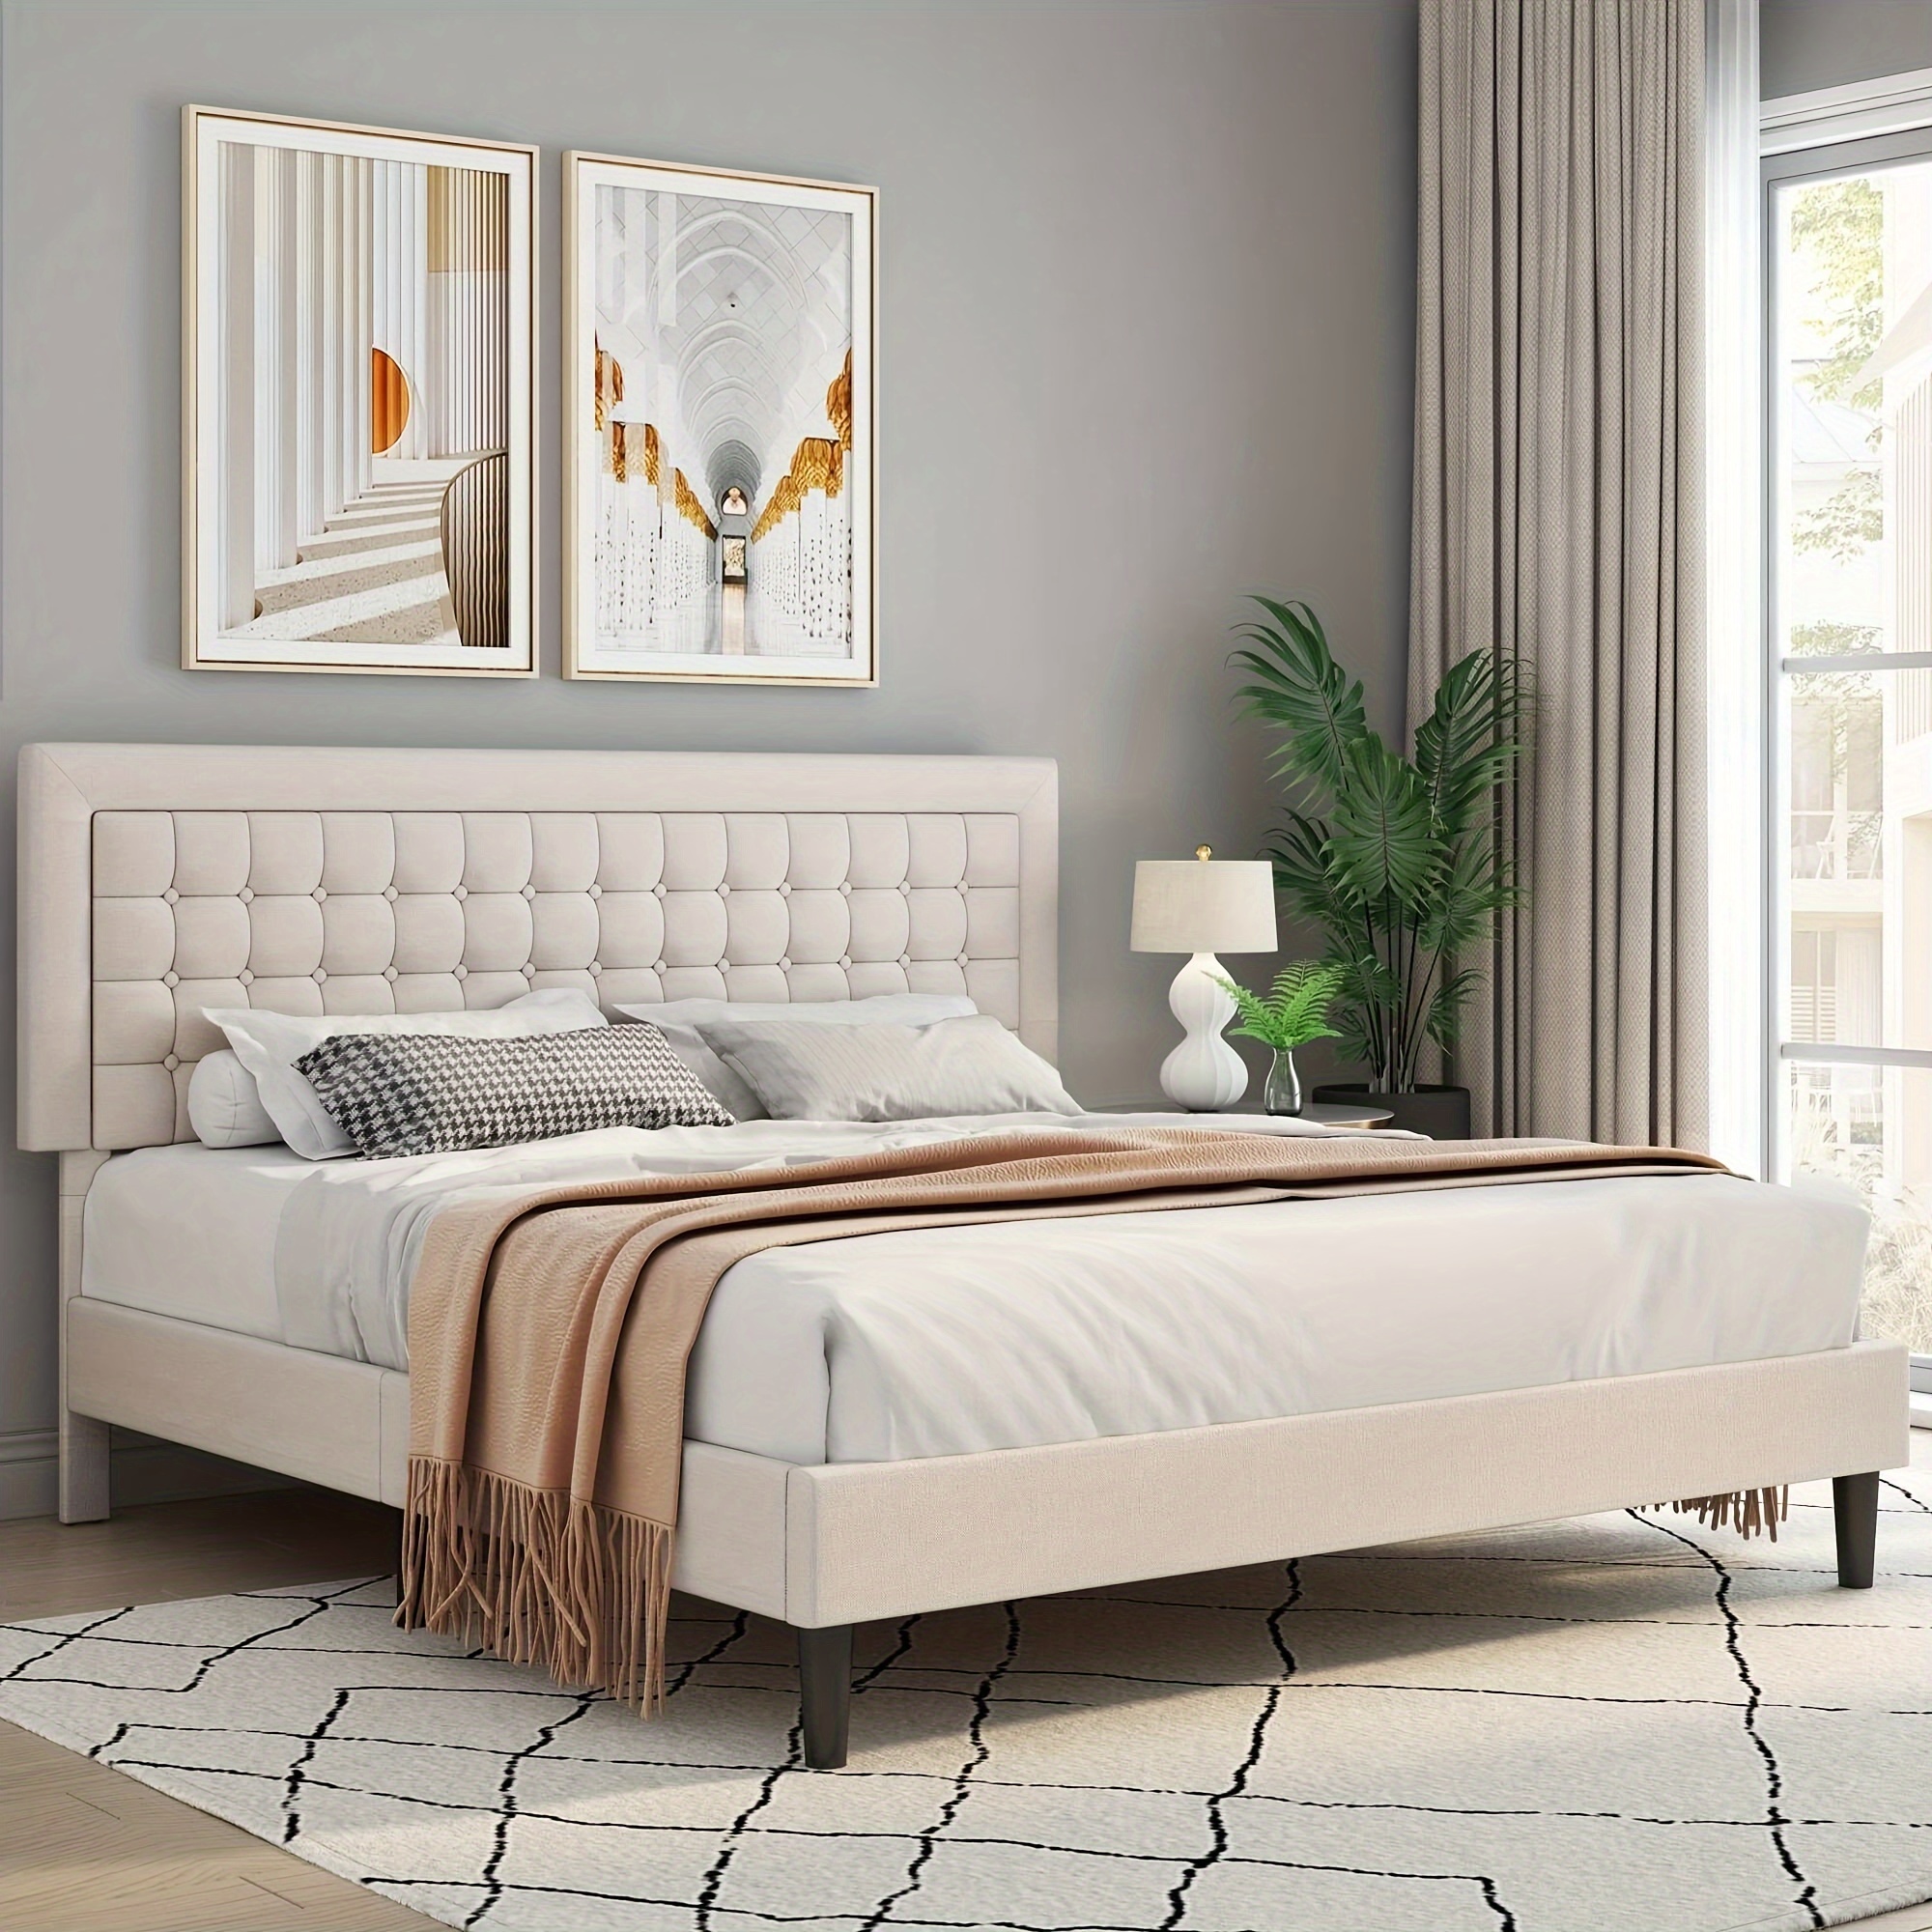 

Fultru Modern Upholstered Bed Frame With Button Tufted Adjustable Headboard, Platform Bed Frame, No Box Spring Needed/no Noise/easy Assembly